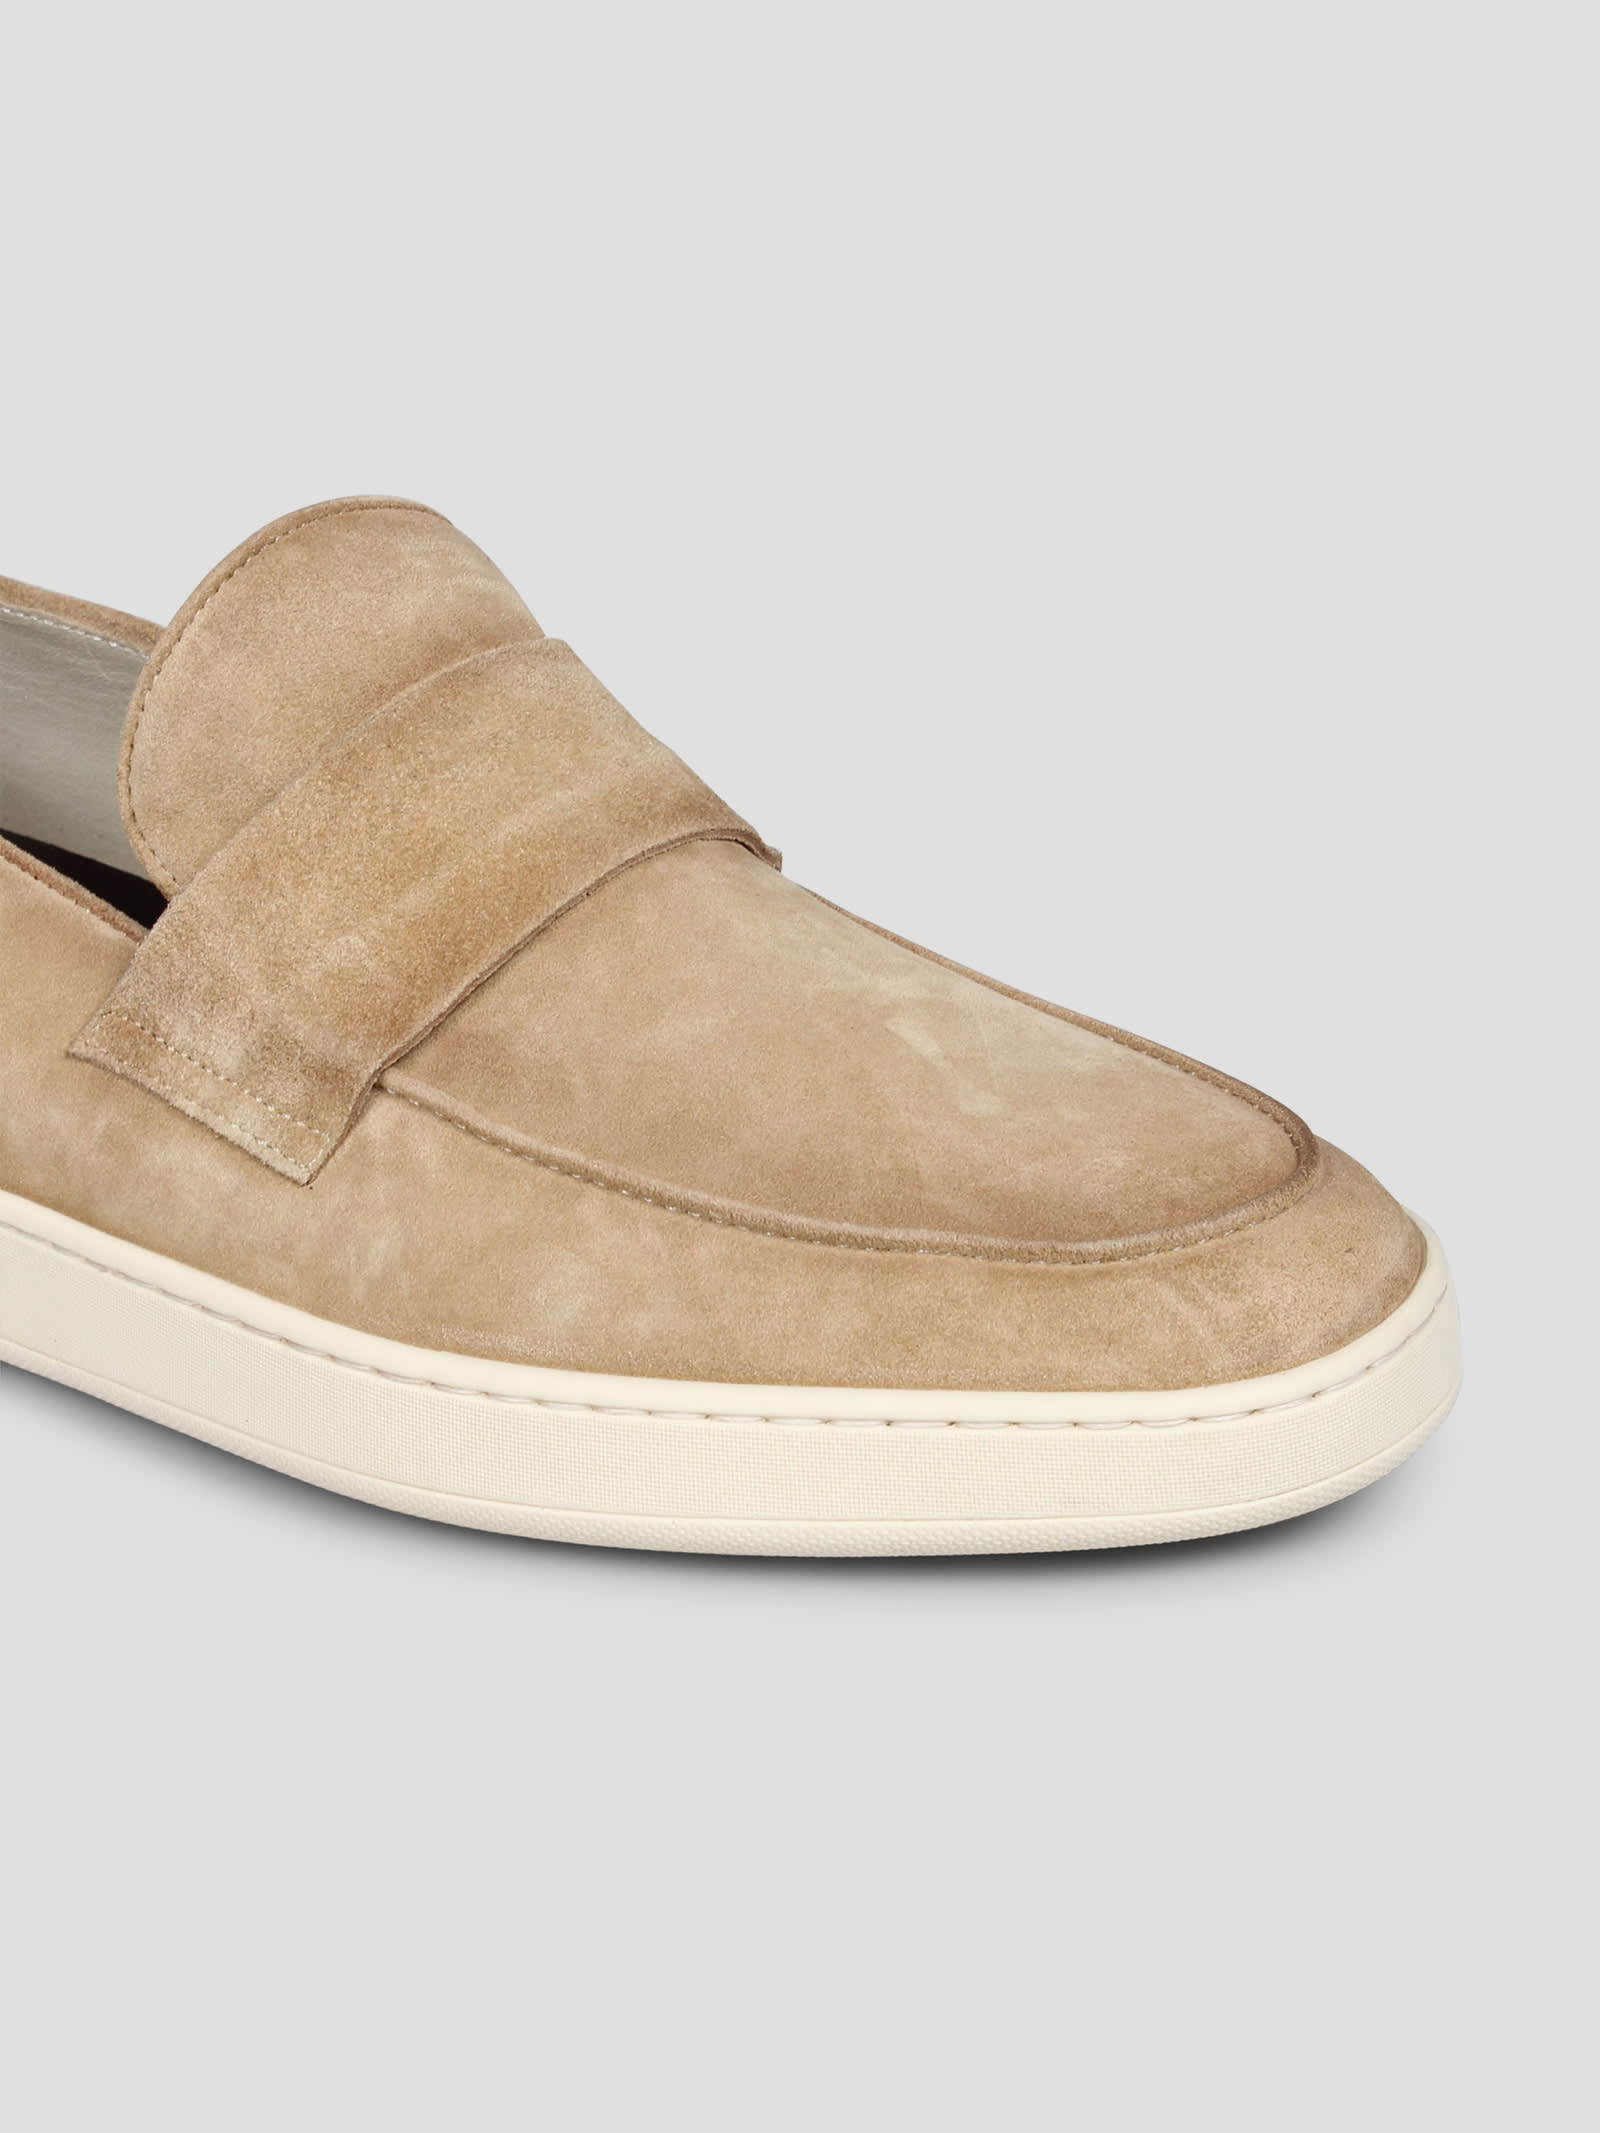 Shop Corvari Boat Penny Loafers In Nude & Neutrals